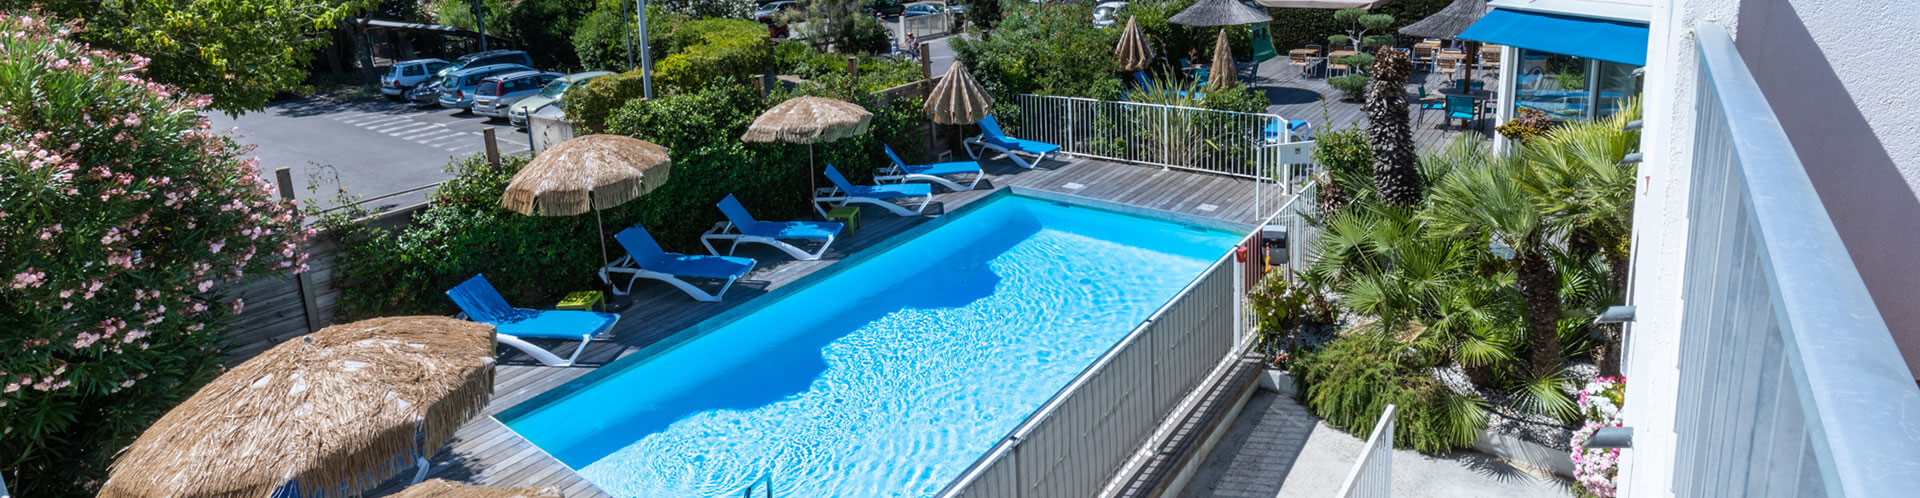 Secure swimming pool and deckchairs to rest - Hotel Europe